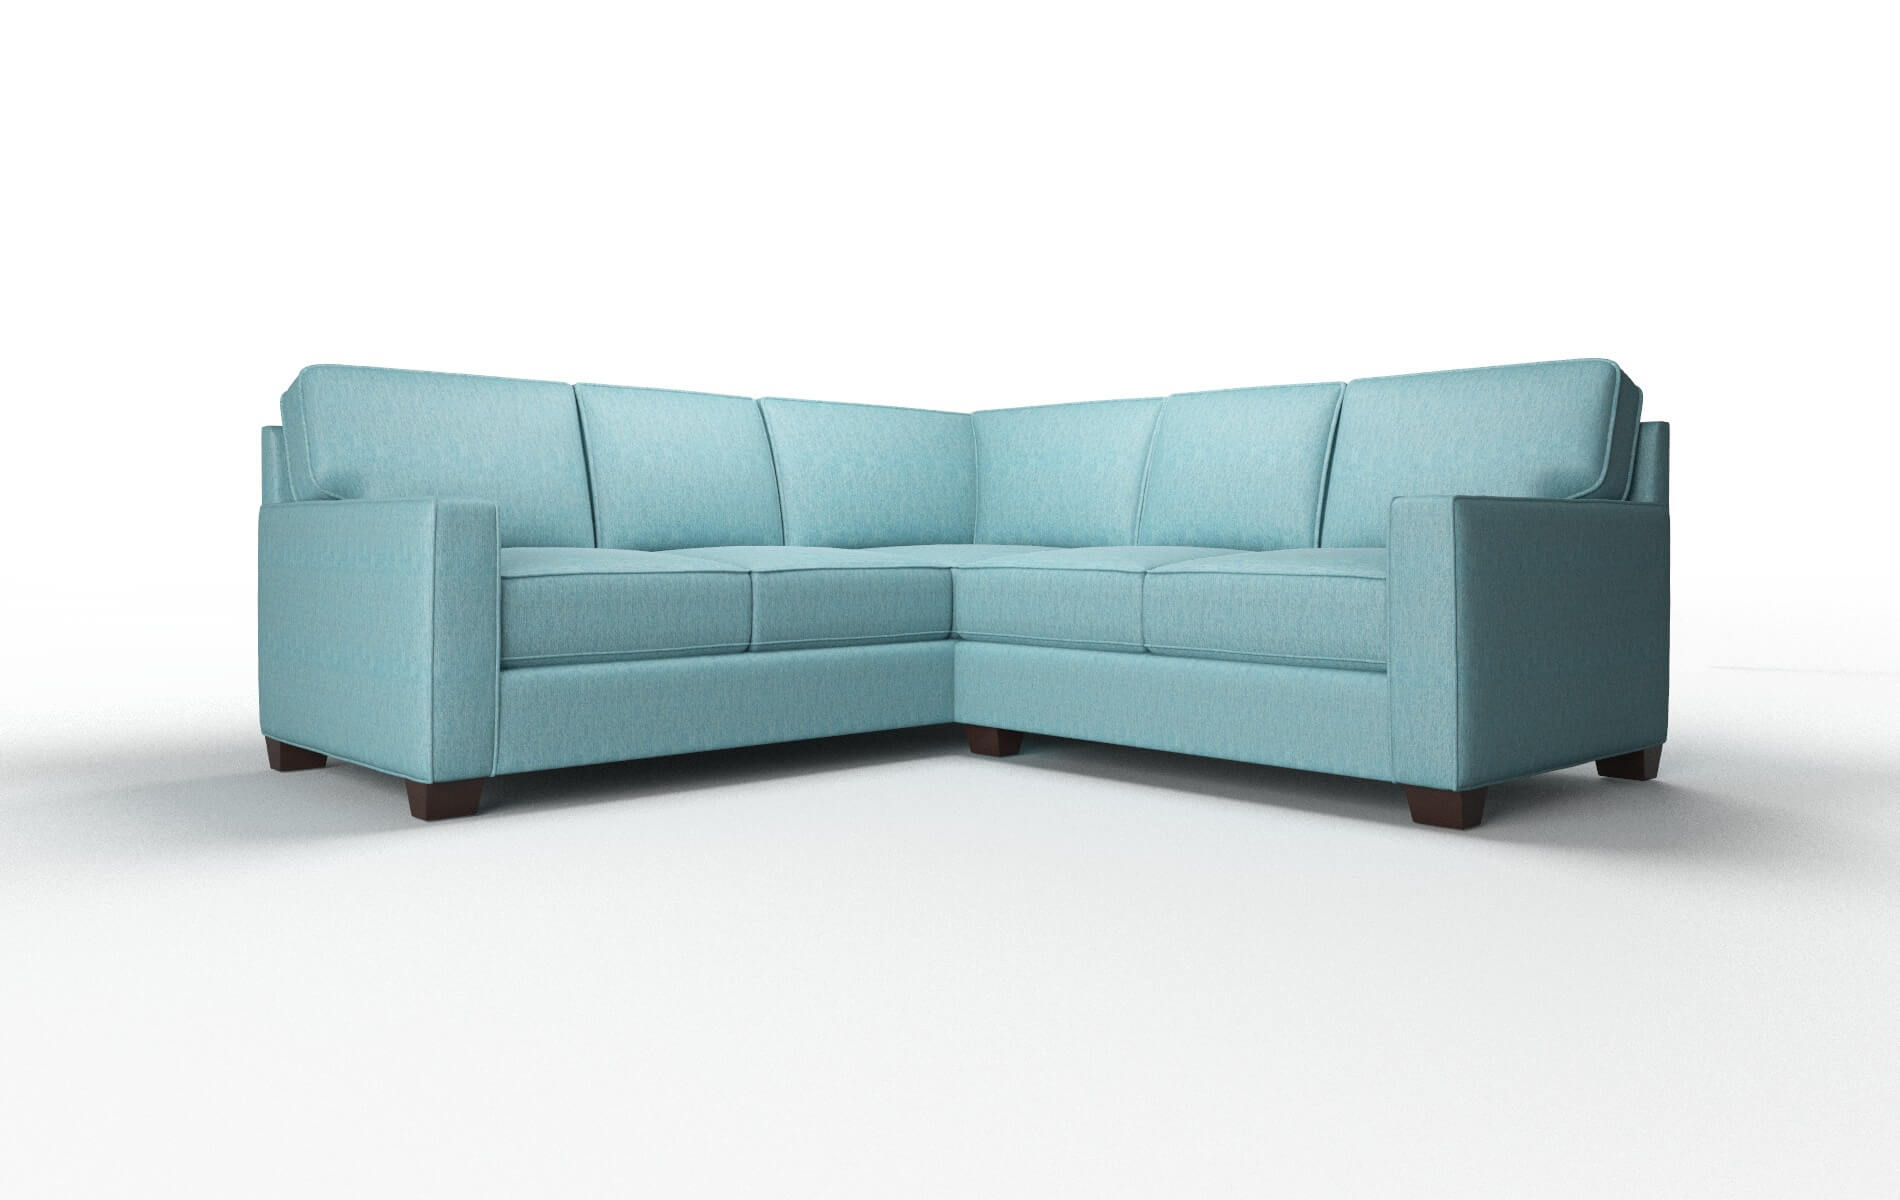 Chicago Cosmo Turquoise Sectional espresso legs